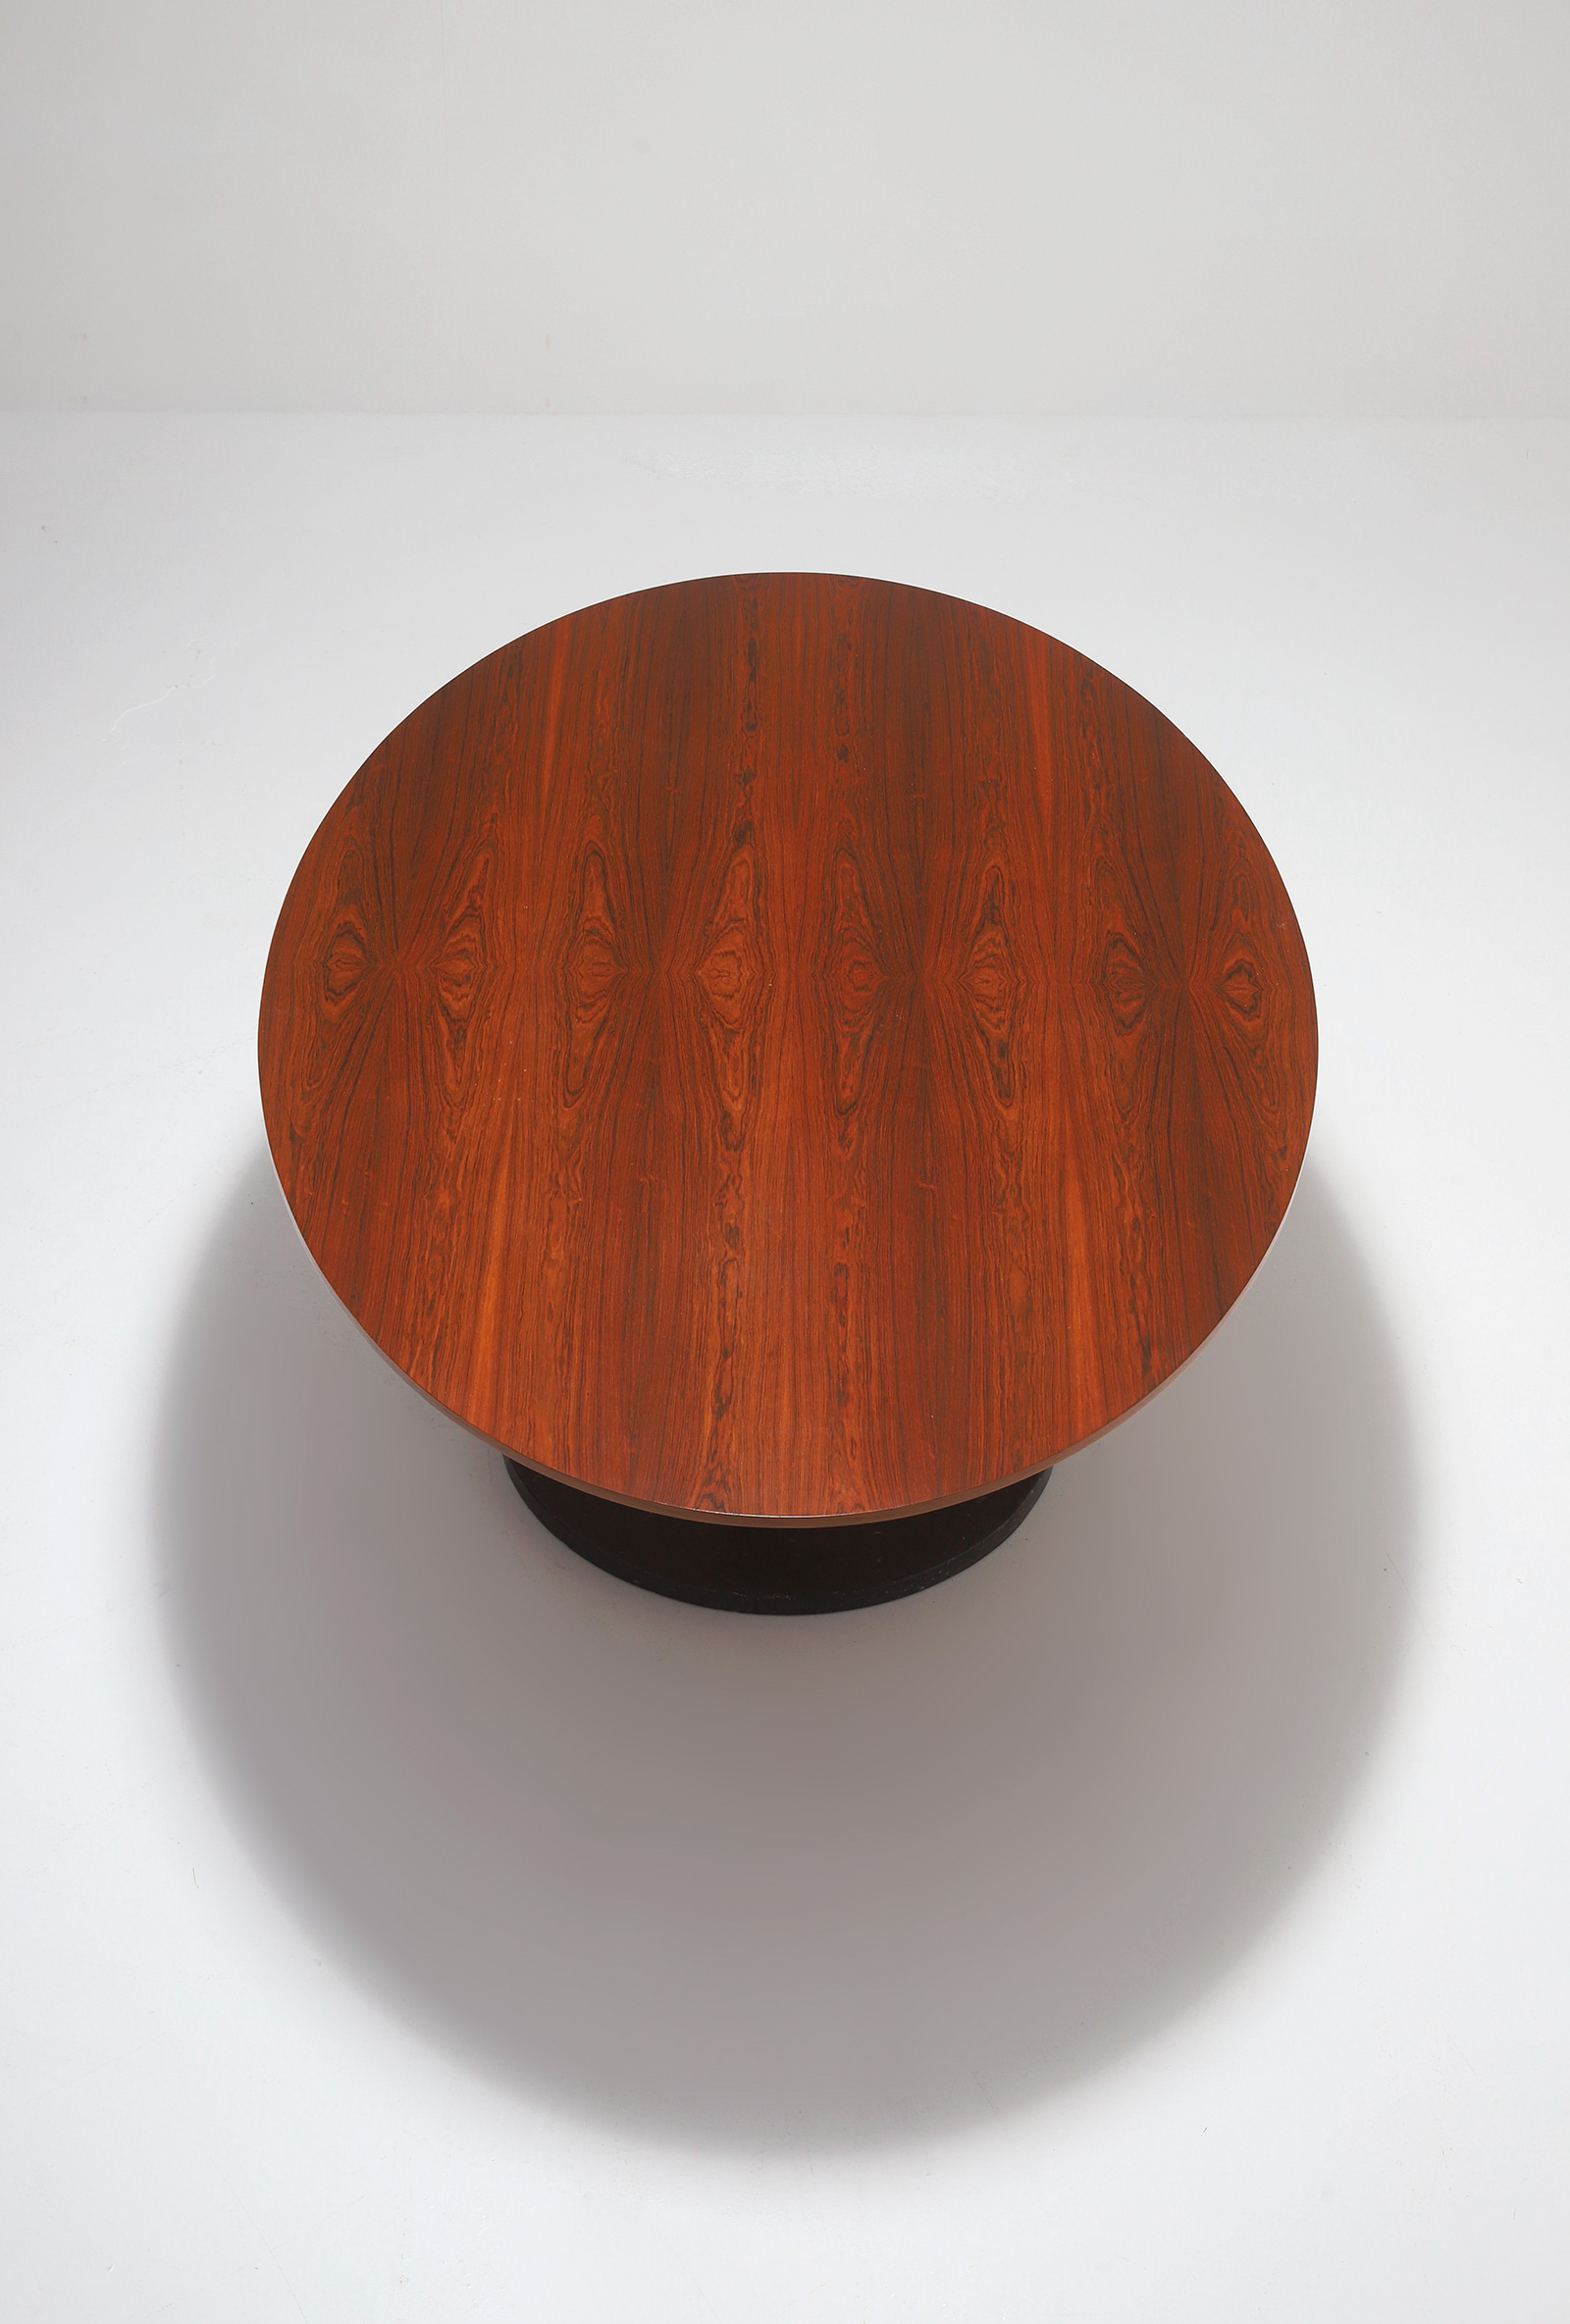 Alfred Hendrickx Oval Dining Tableimage 6